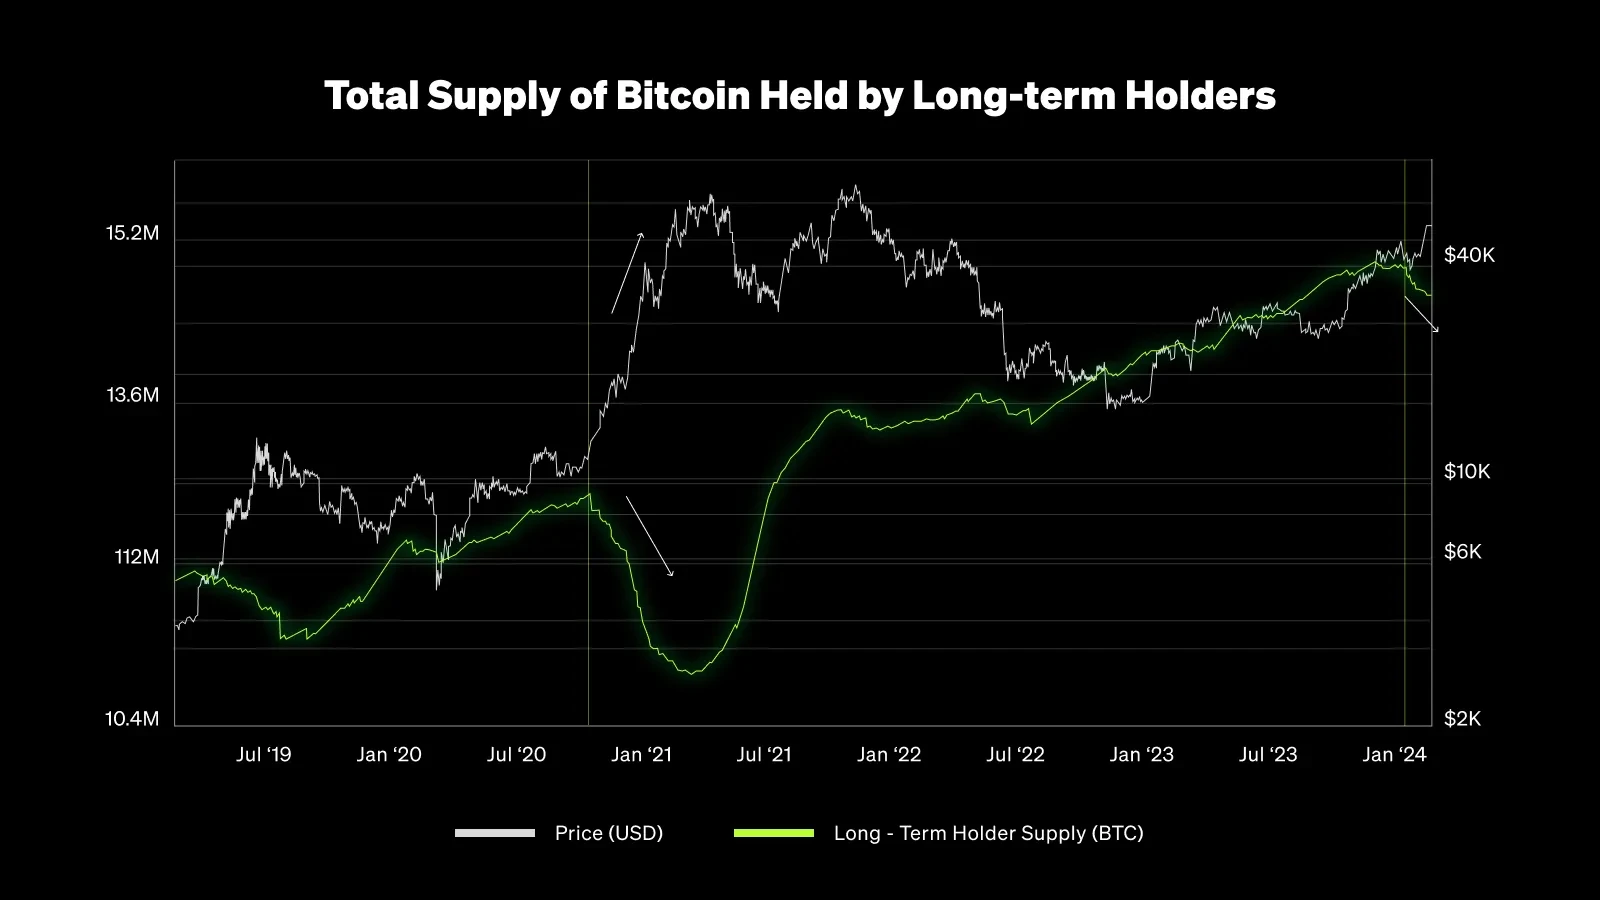 Total supply of Bitcoin held by long-term holders